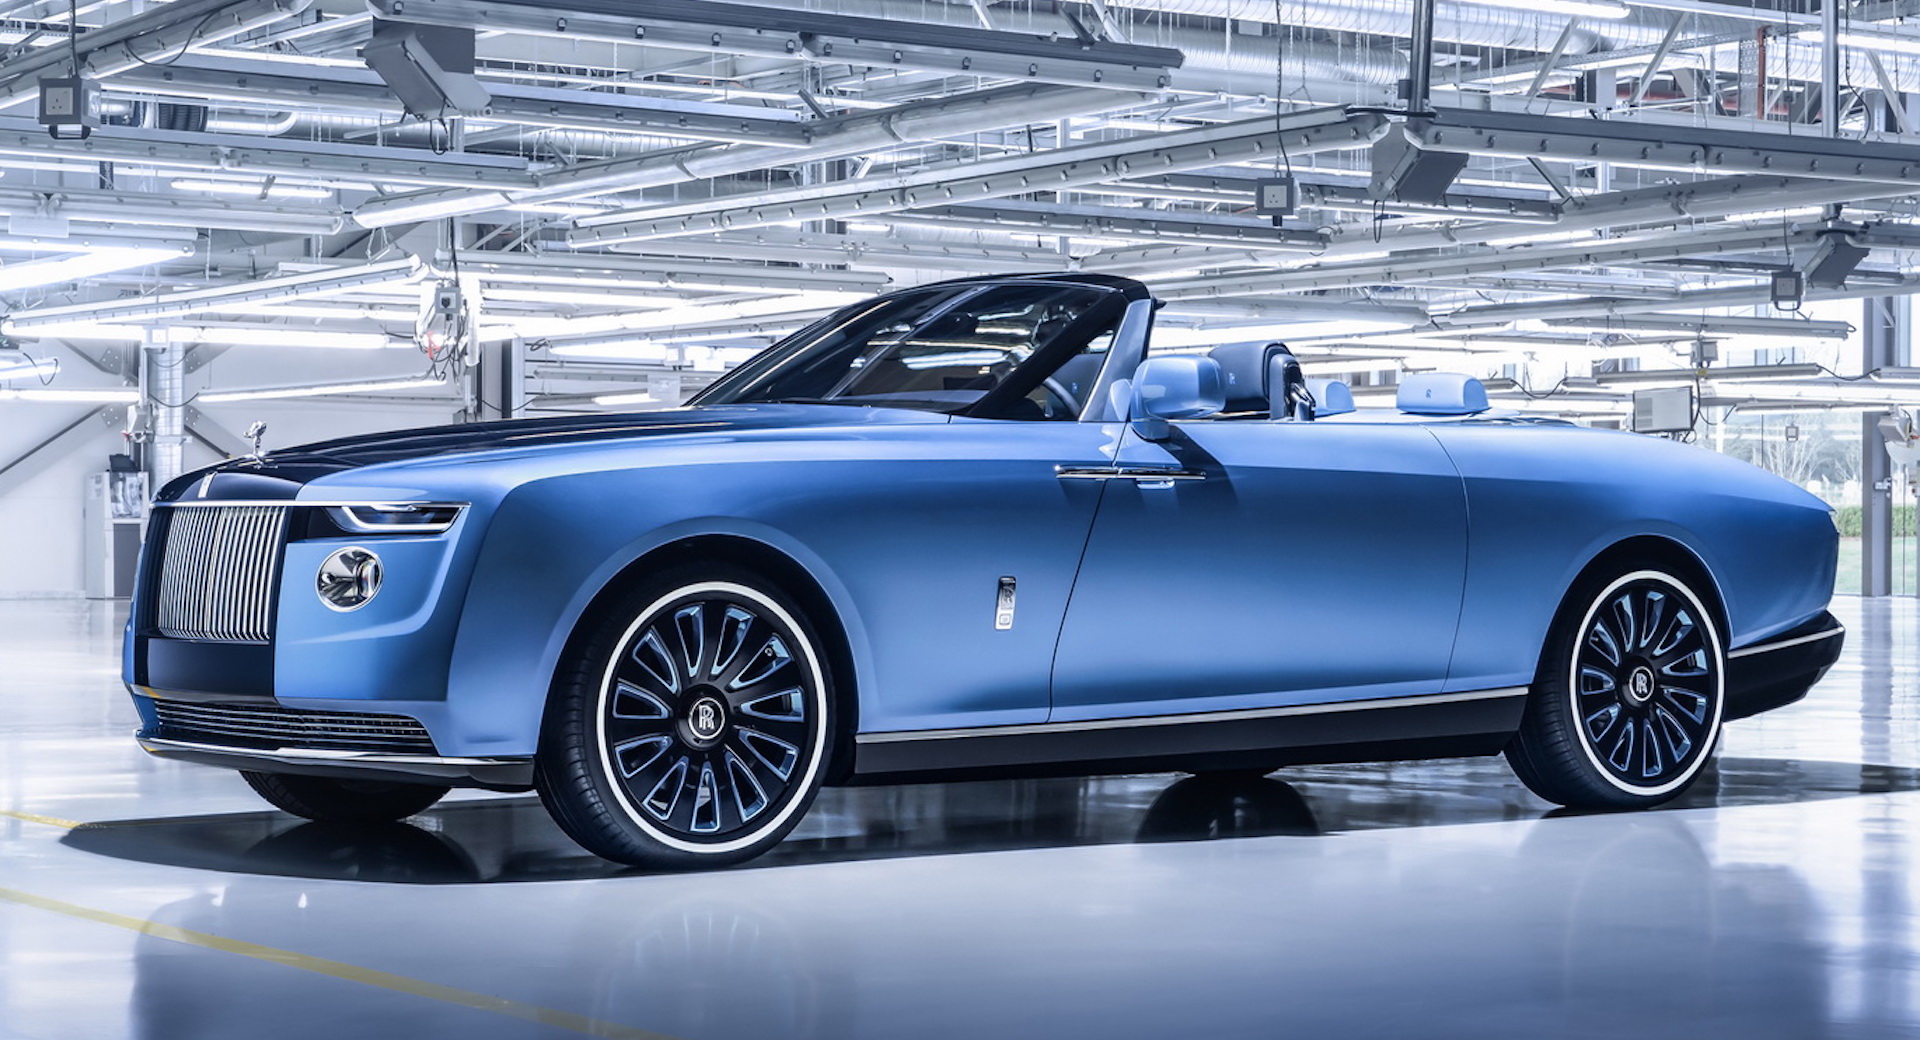 RollsRoyce cars for sale in Queensland  carsalescomau